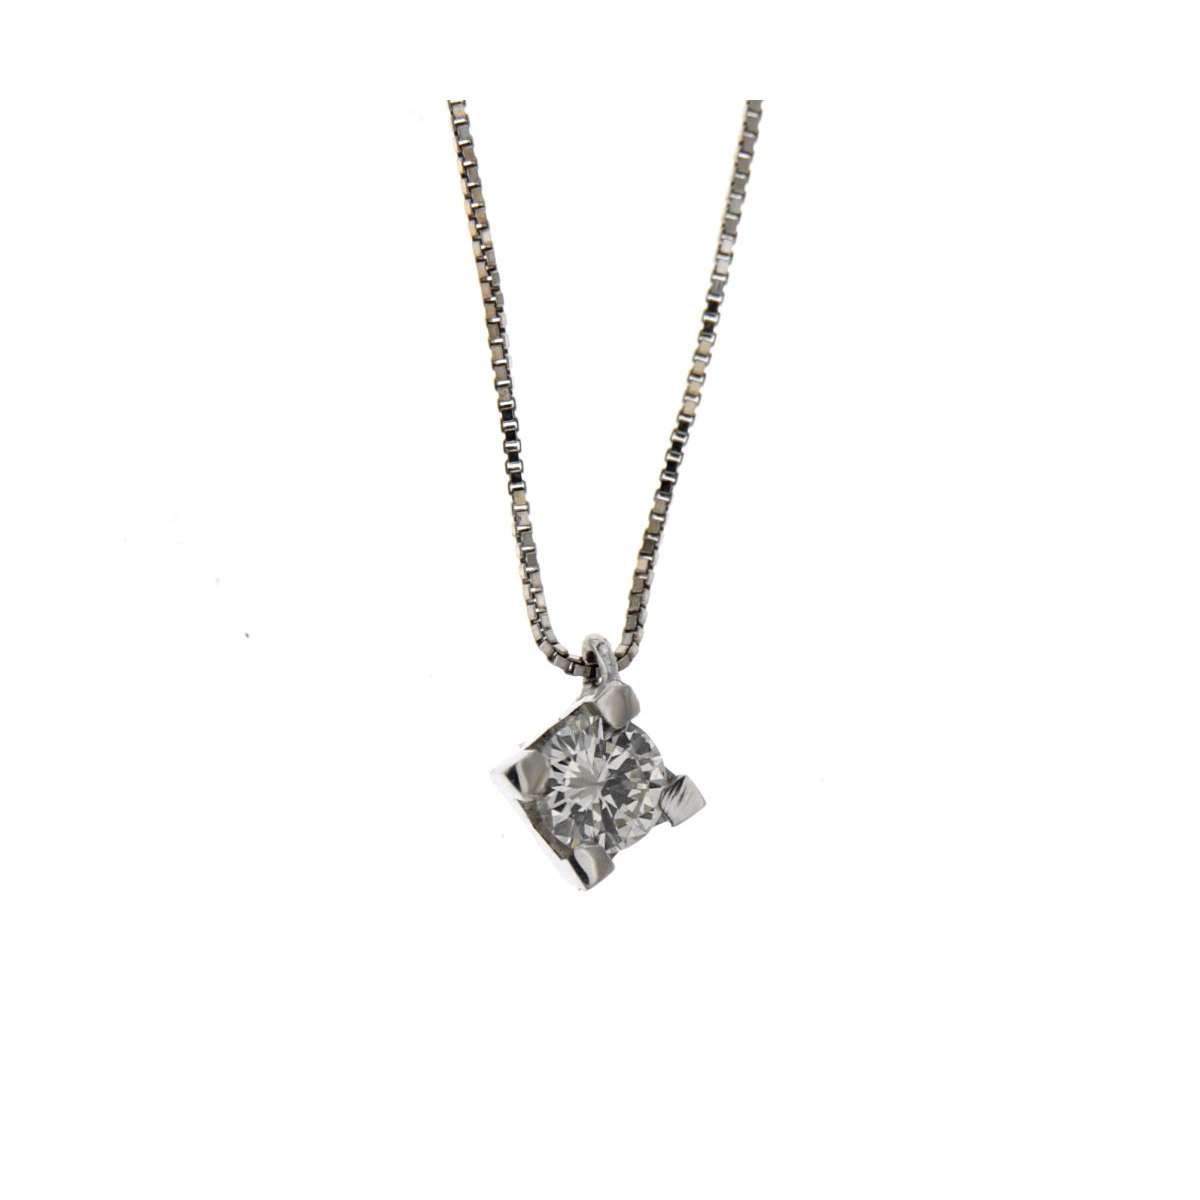 Solitaire necklace 0.25 carats diamond G-VS1 for Christmas